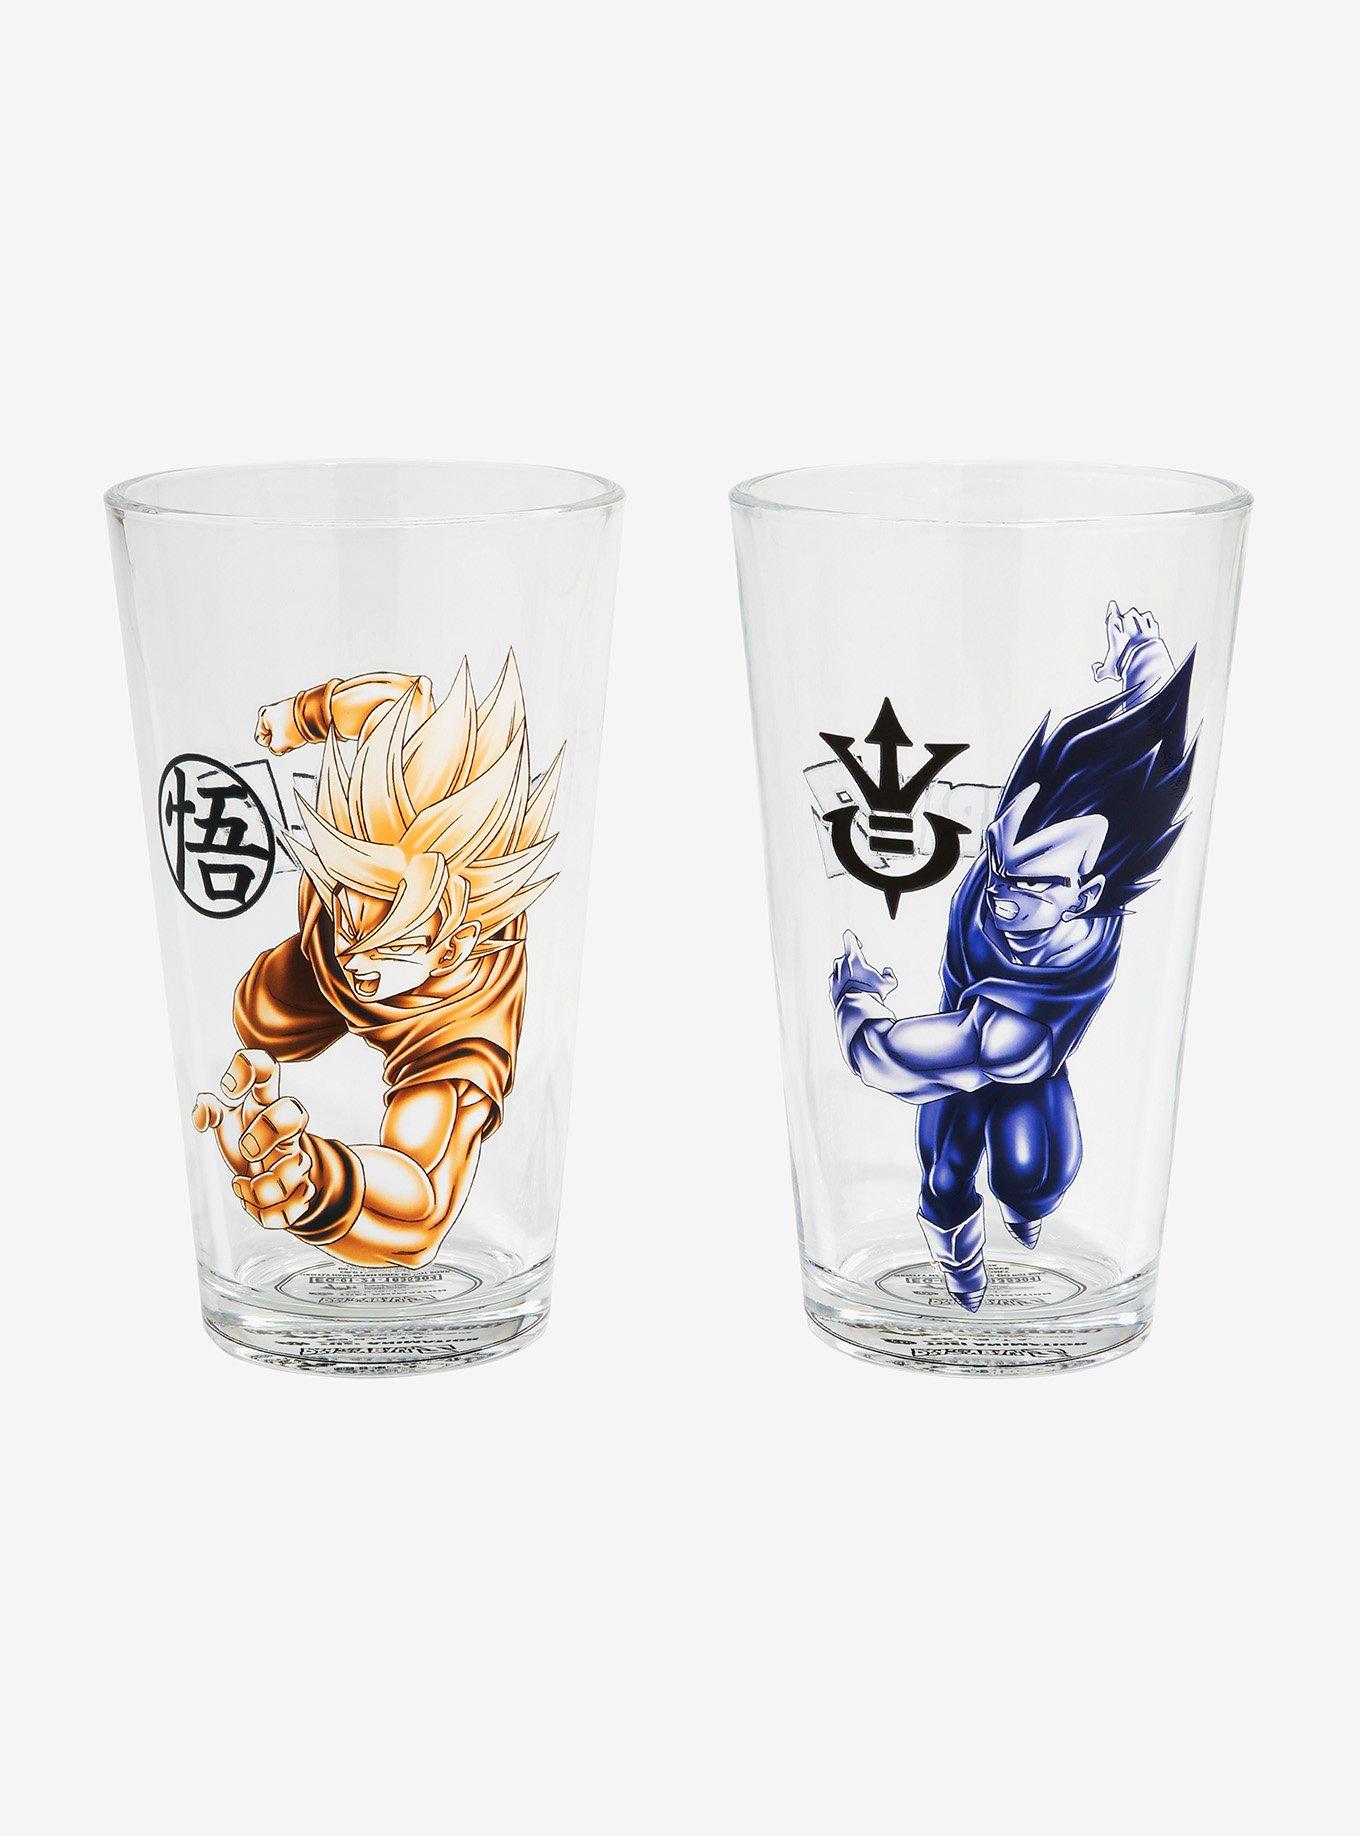 Dragon Ball Z Red Goku Large Drinking Cup Glass in box